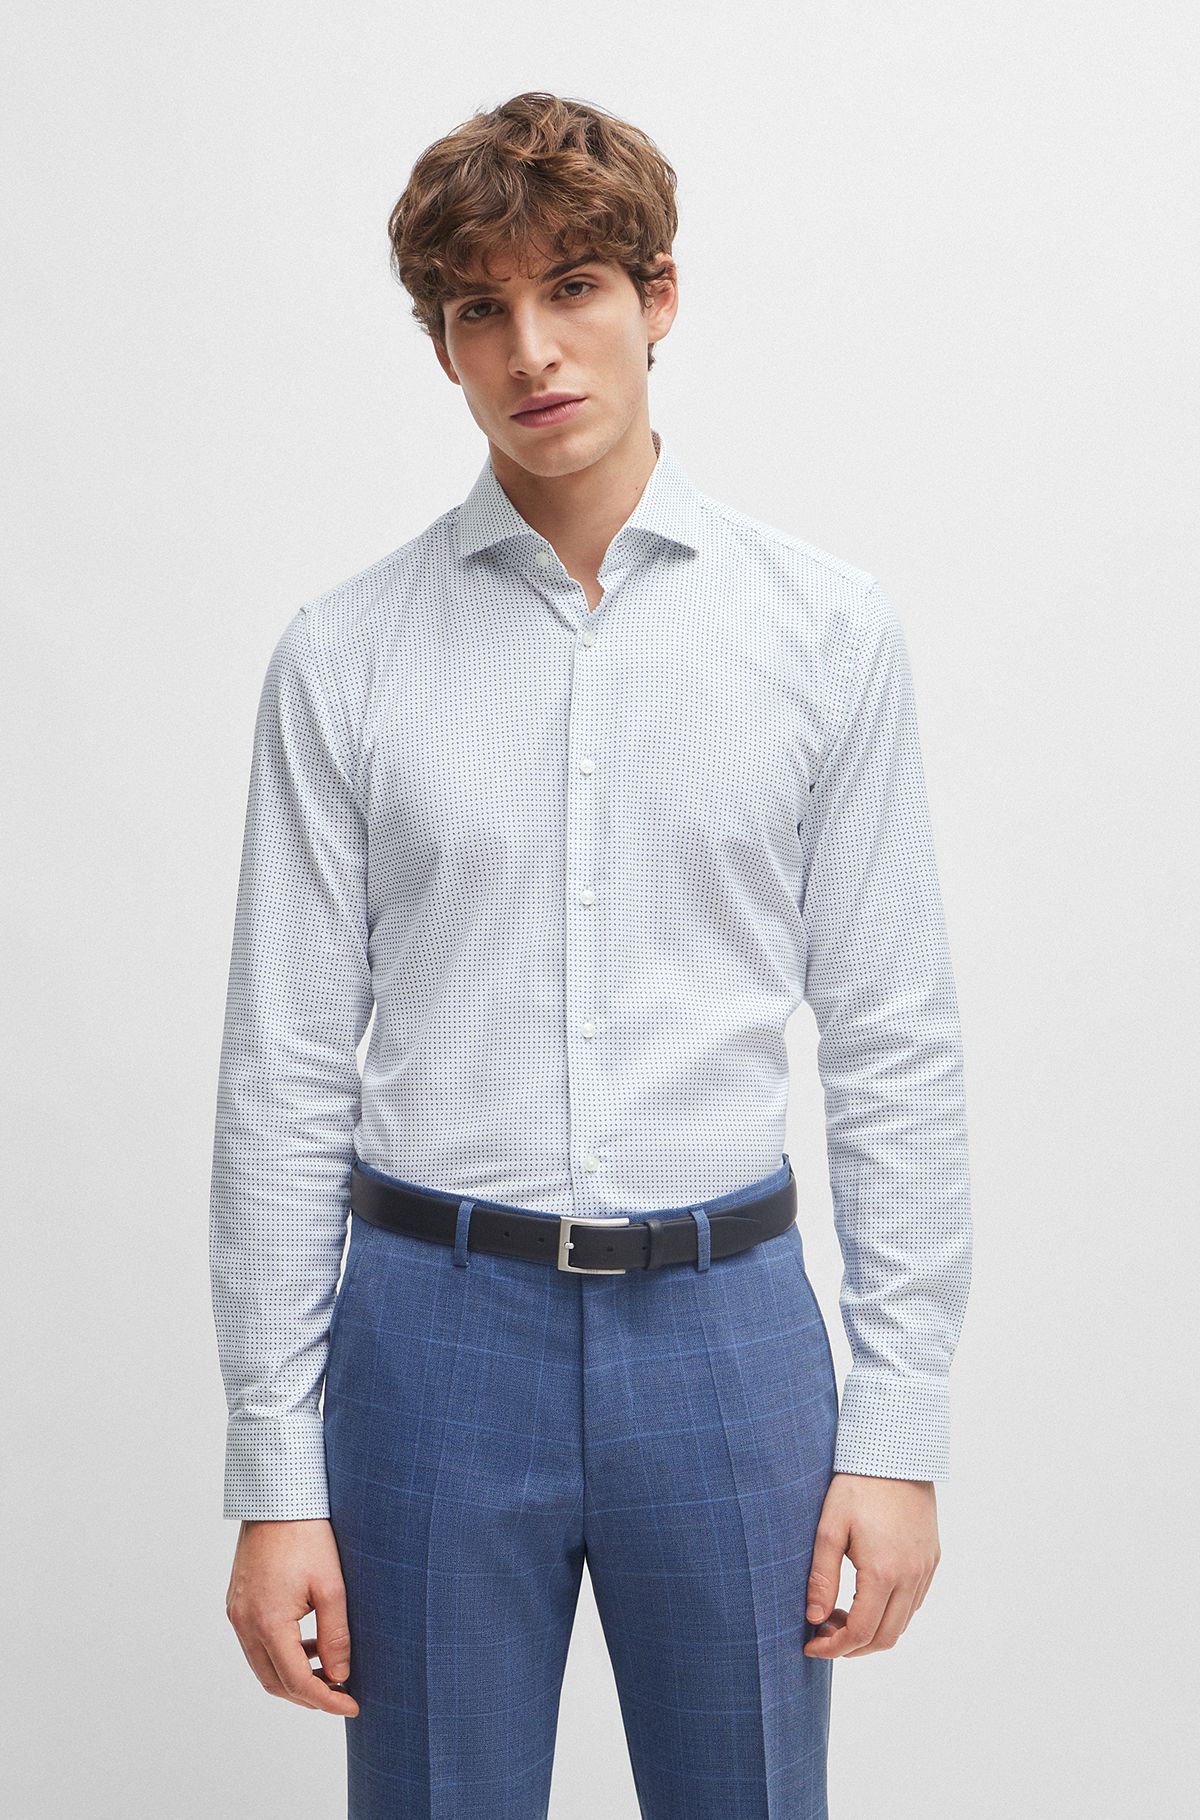 Slim-fit shirt in printed Oxford stretch cotton, White